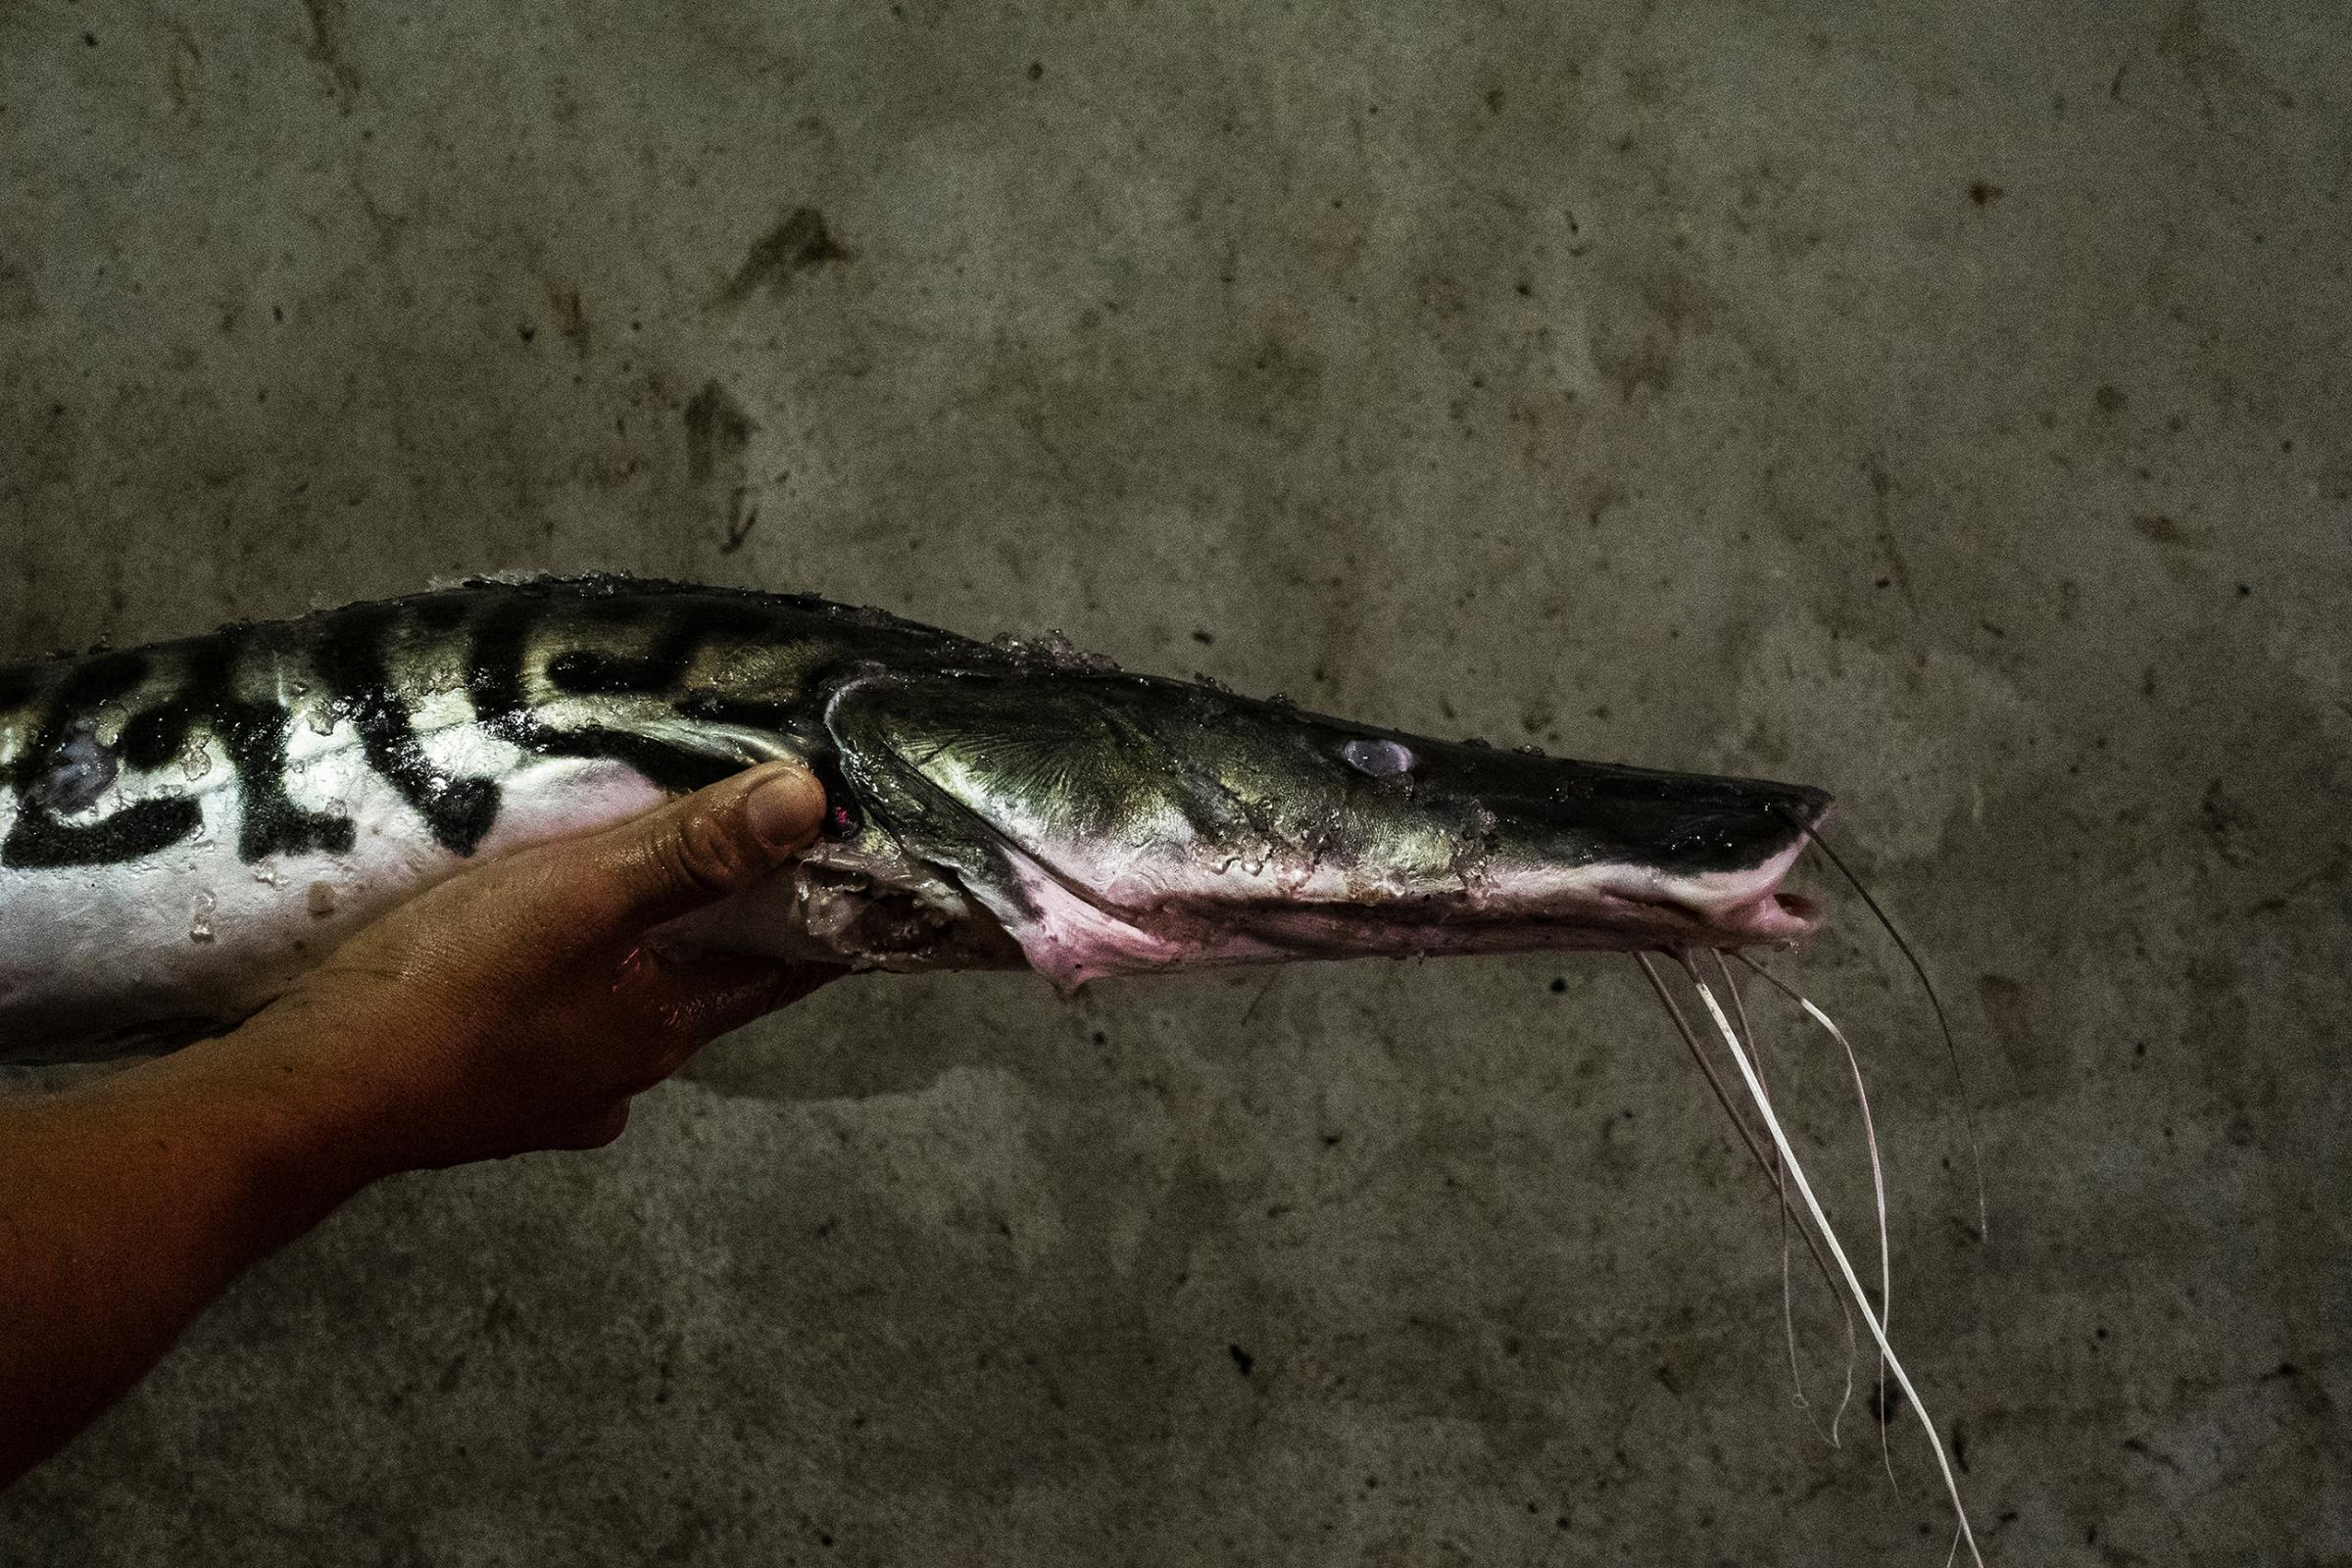 A man sells a Doncella fish in a market in Iquitos, Peru. The Doncella fish is a species of bagre or &quot;catfish&quot; and, like the paiche, is a characteristic species of the Amazon. It is the primary food of many families.